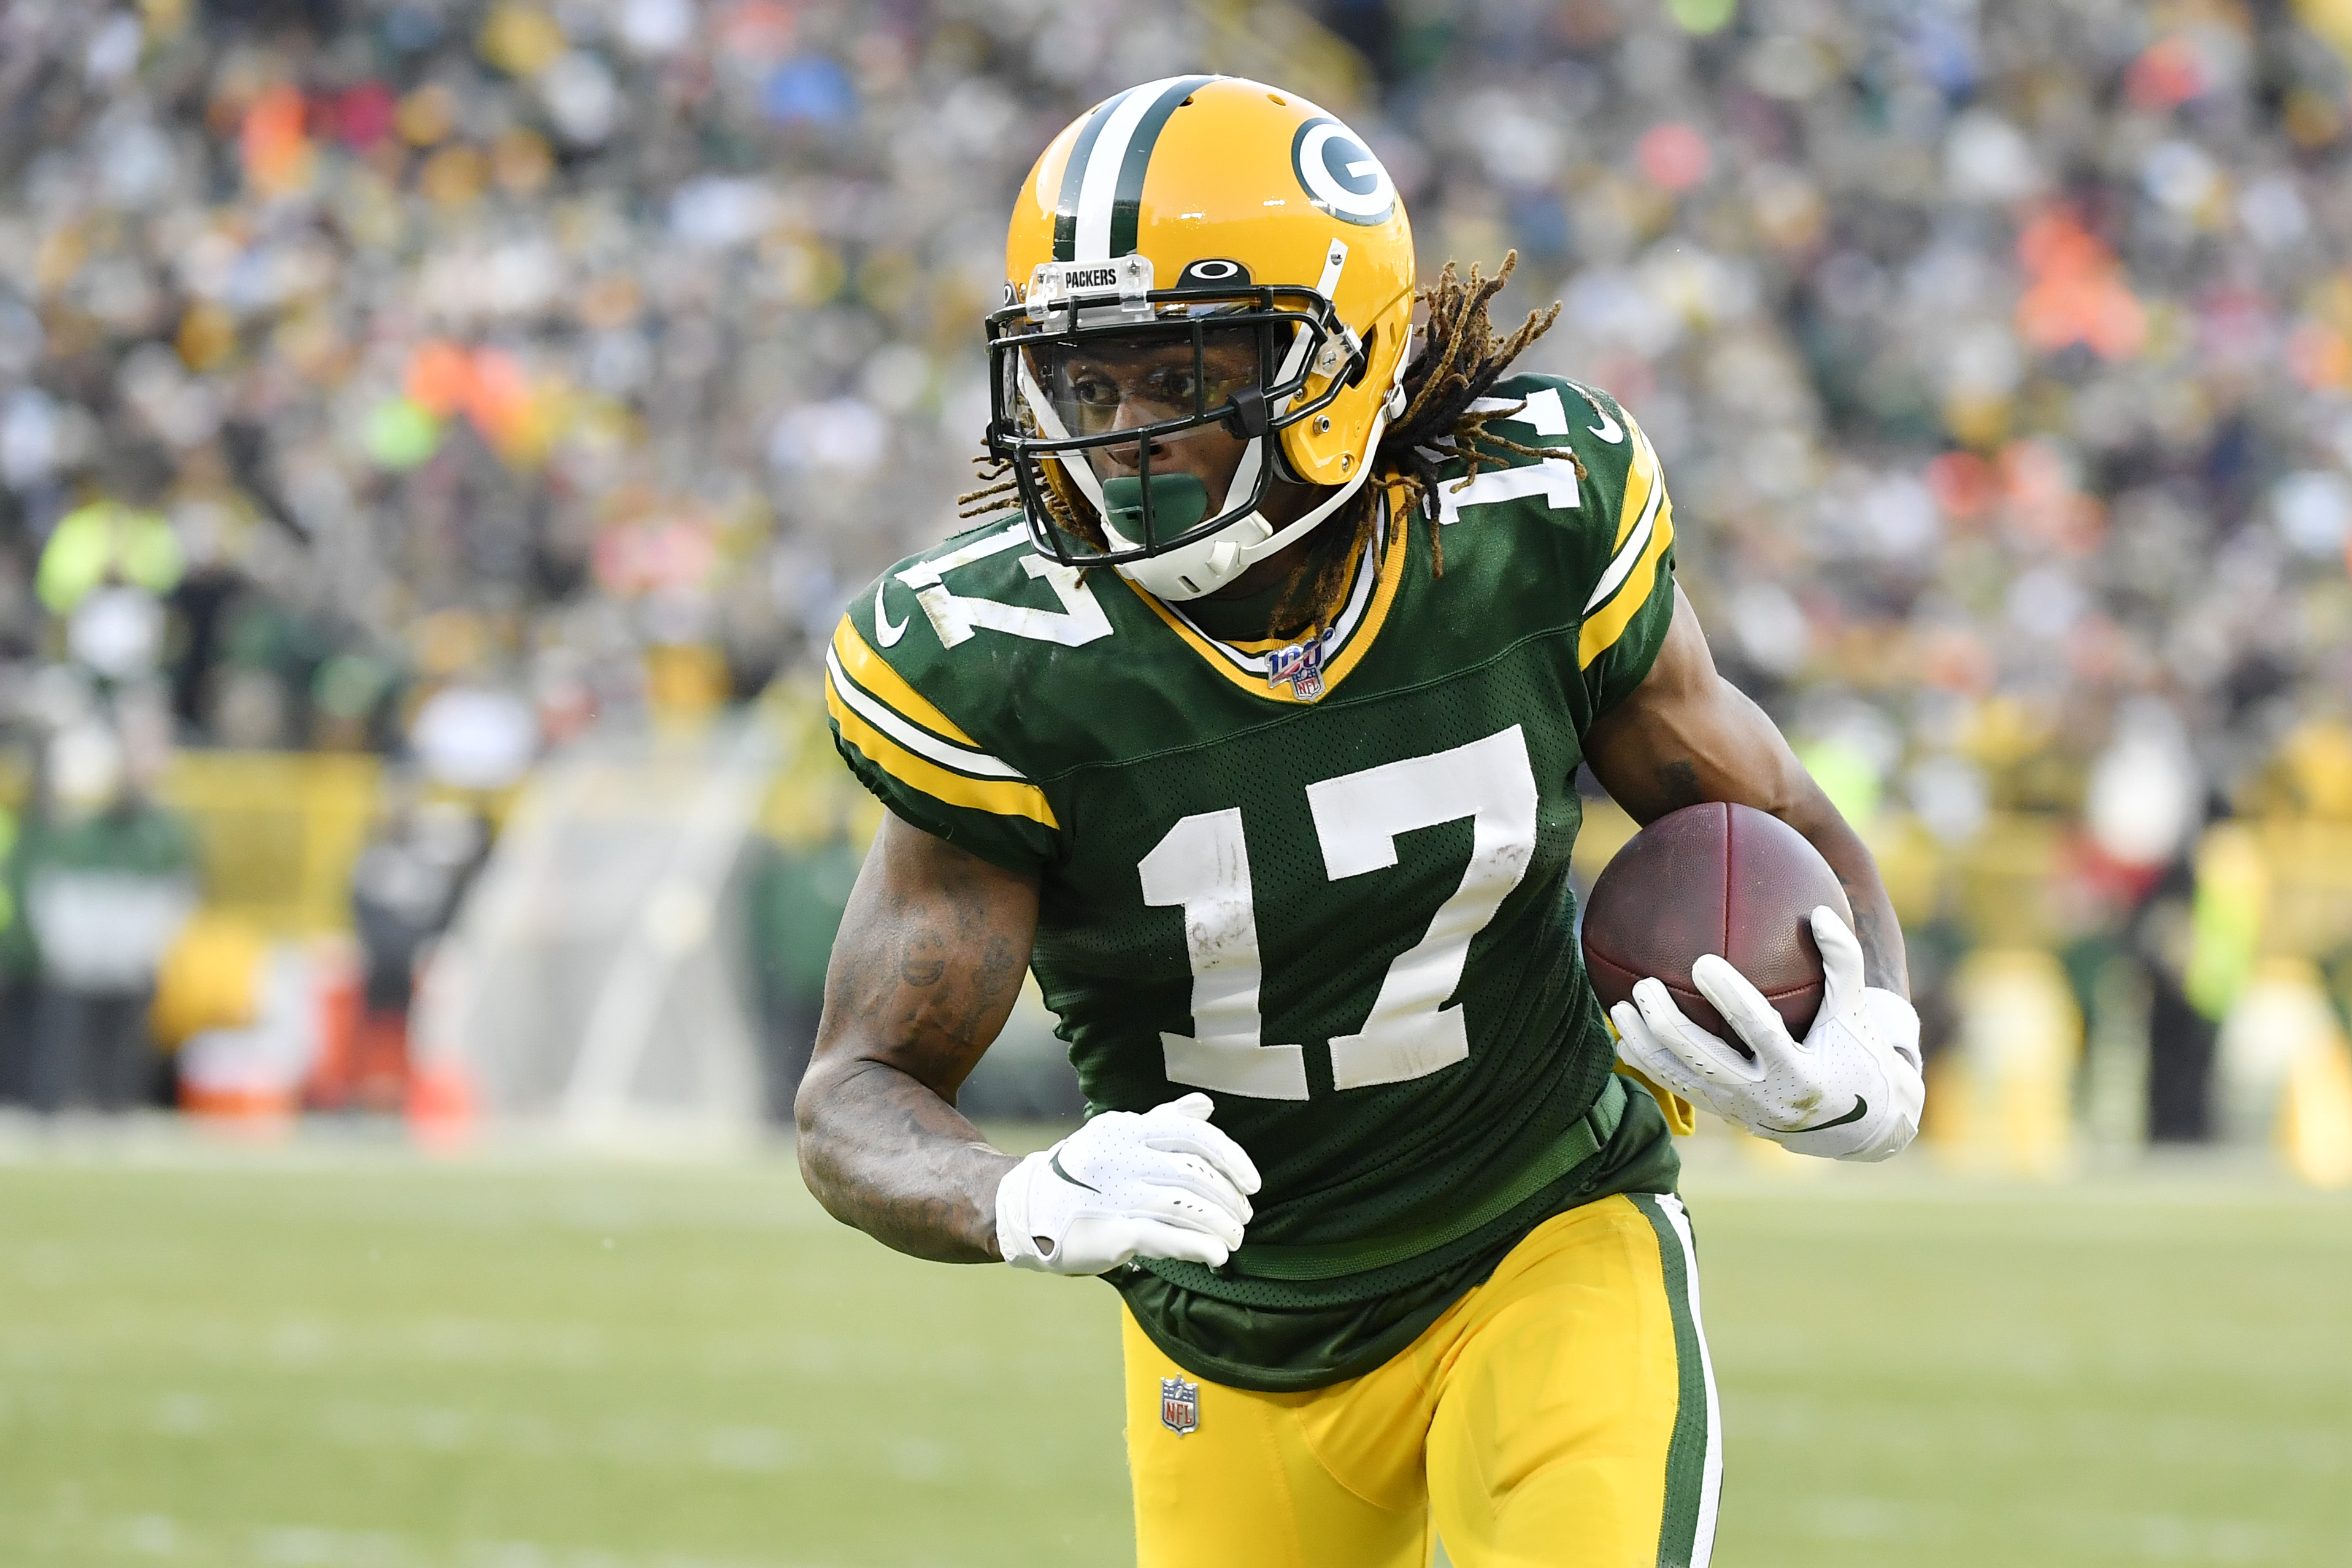 Davante Adams running with the ball after making a catch